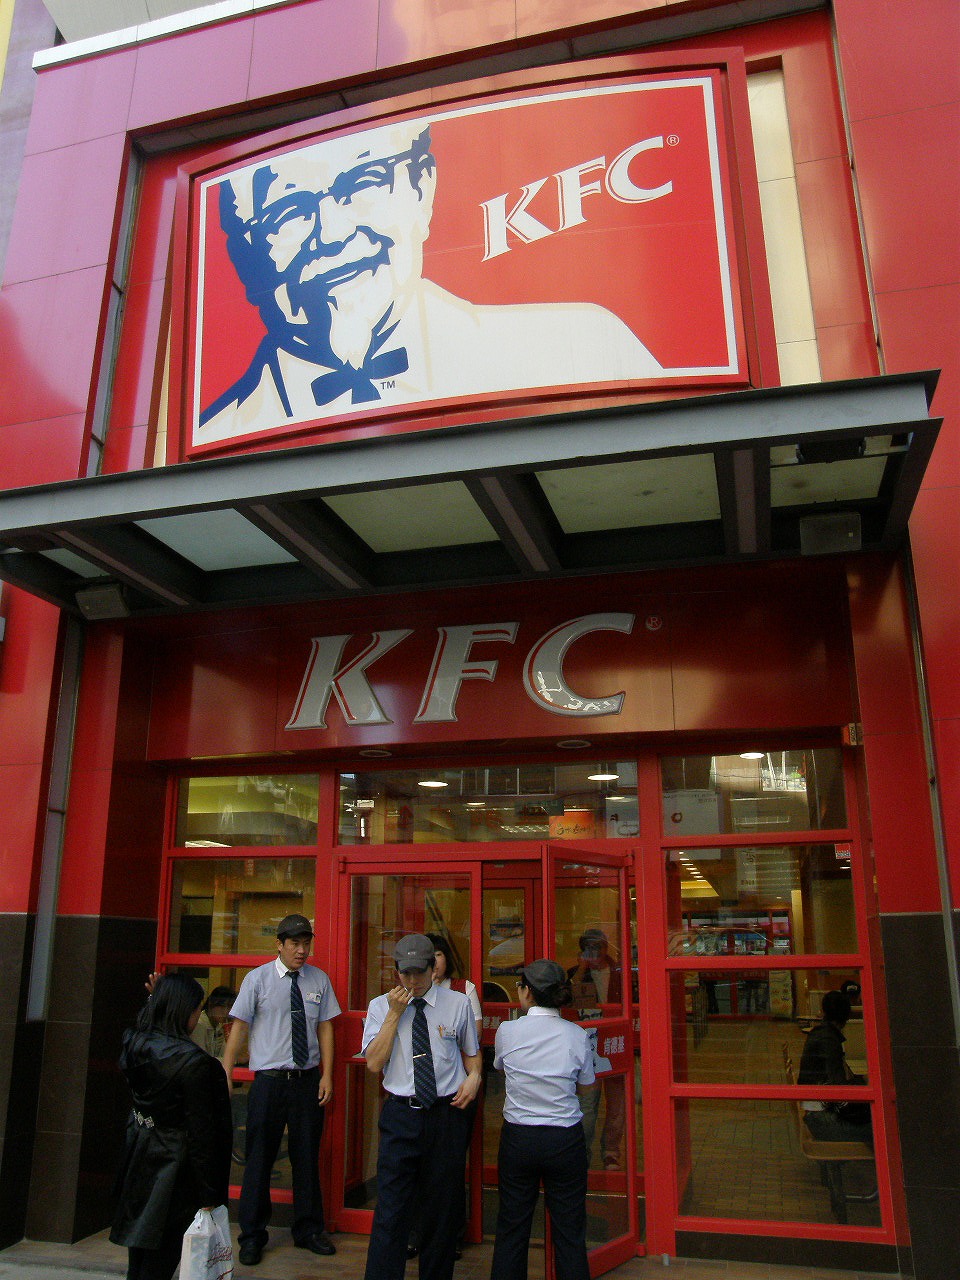 KFC India plans to unveil 20 eco-friendly restaurants in 2022